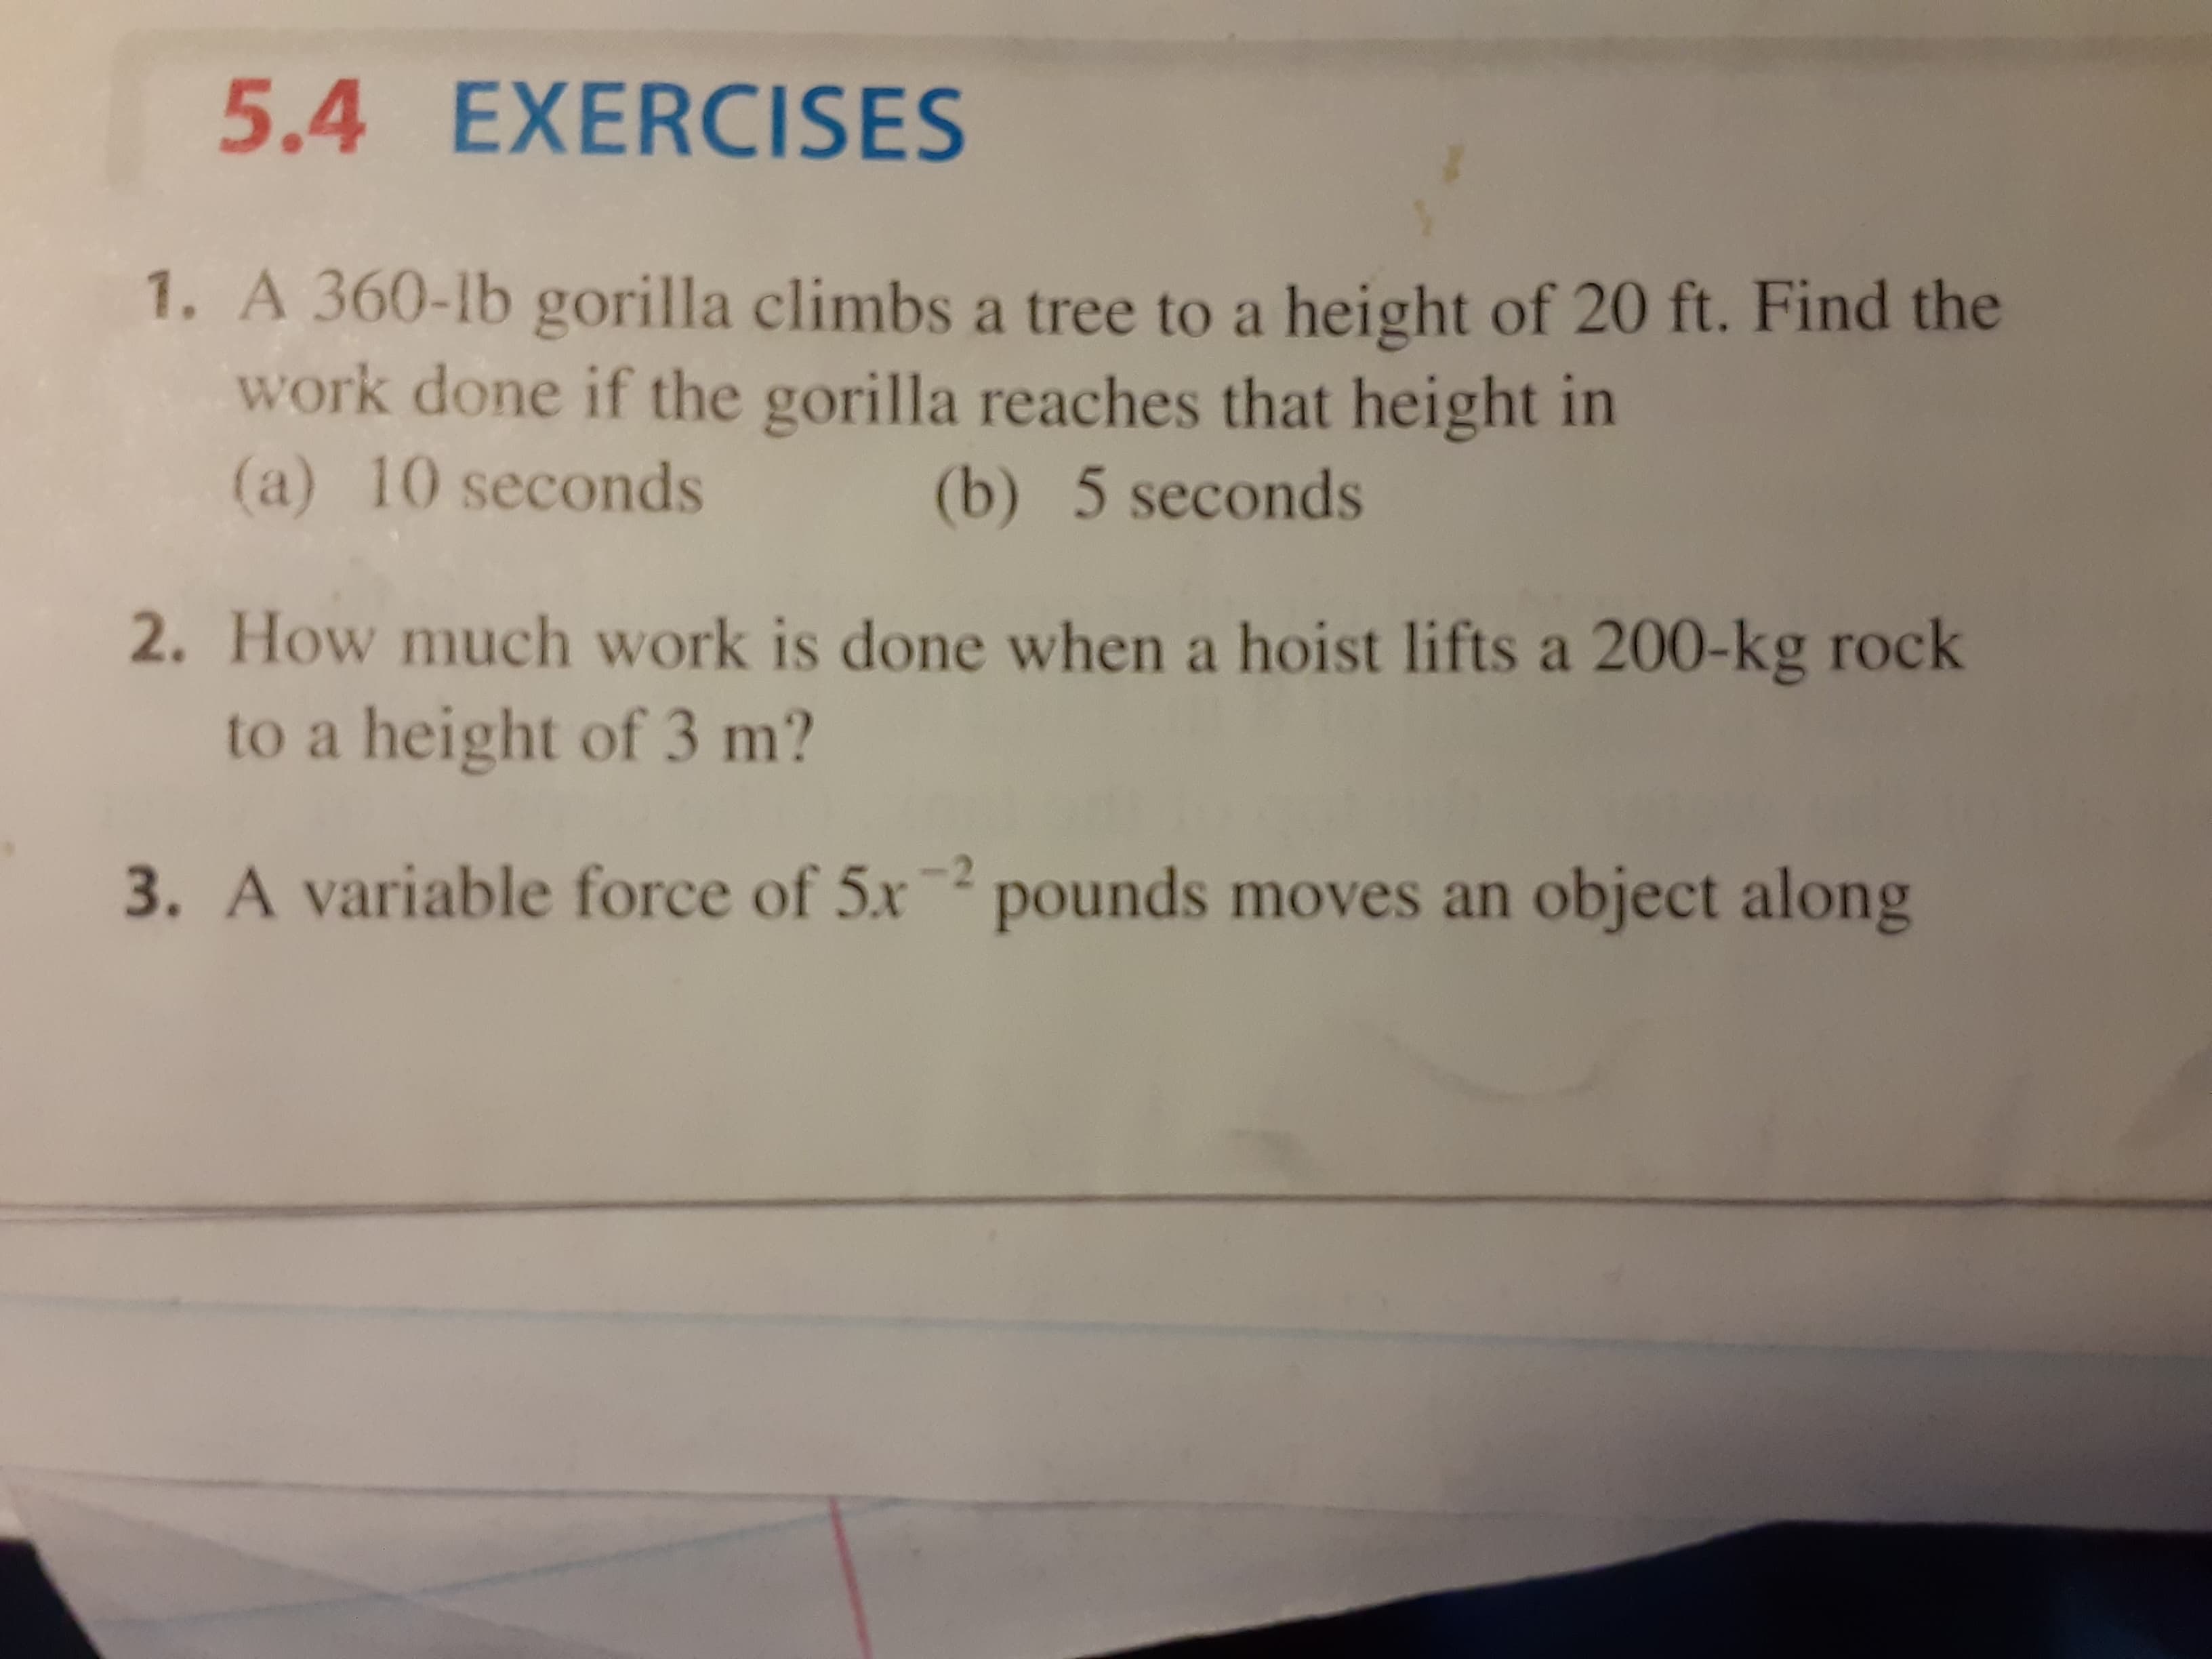 -2
.A variable force of 5x pounds moves an
object along
